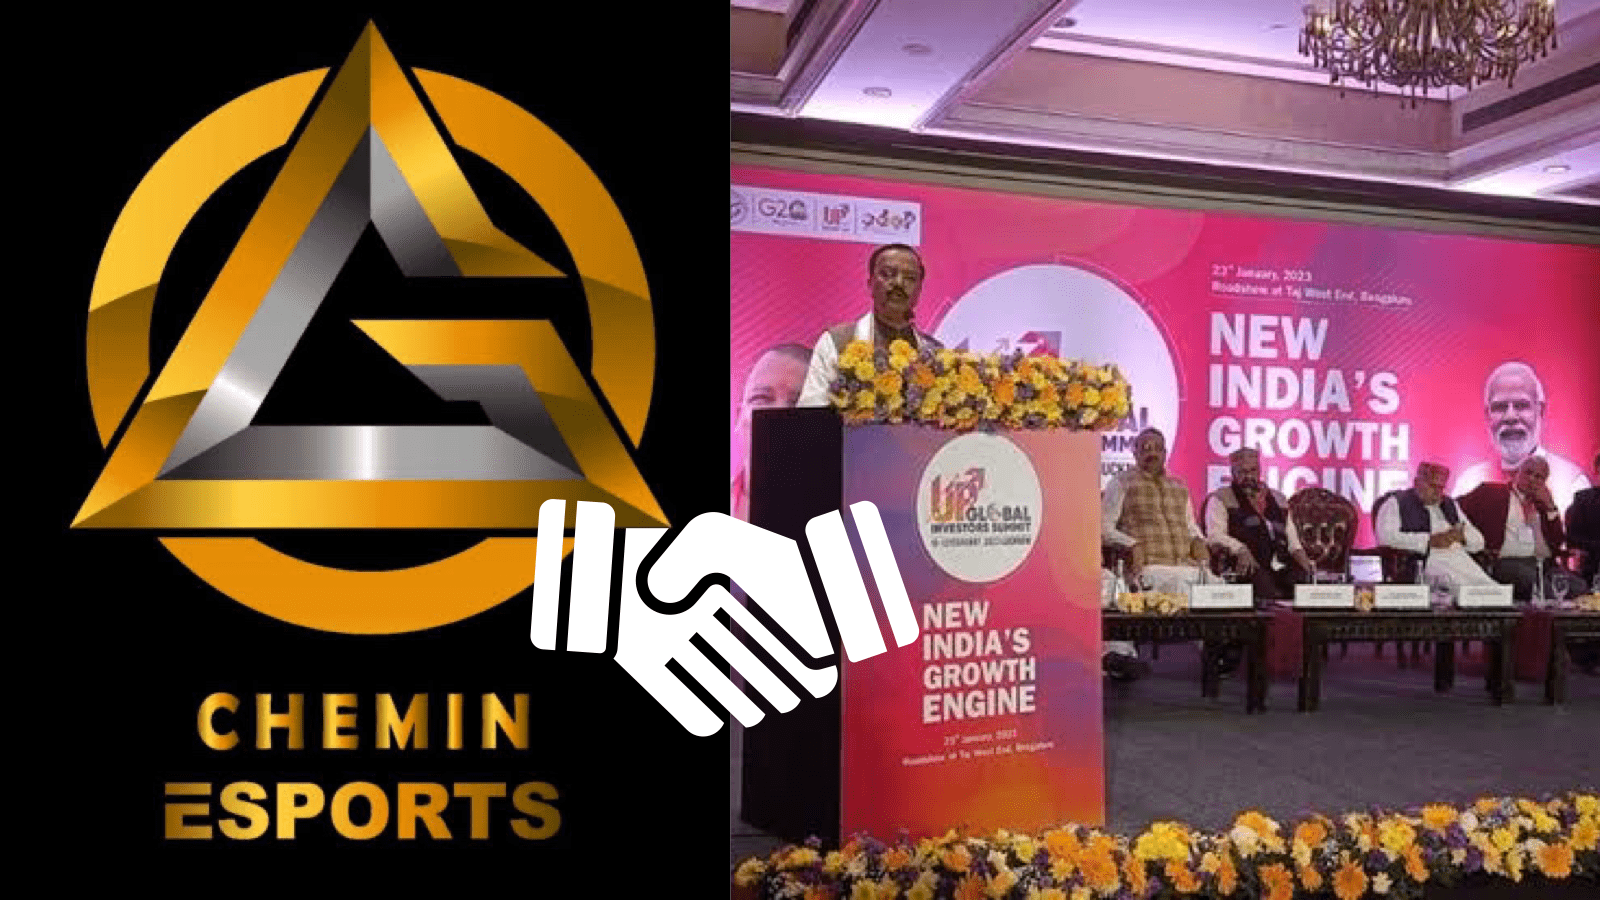 Chemin Esports signs MOU with Uttar Pradesh to Boost Esports Development in India